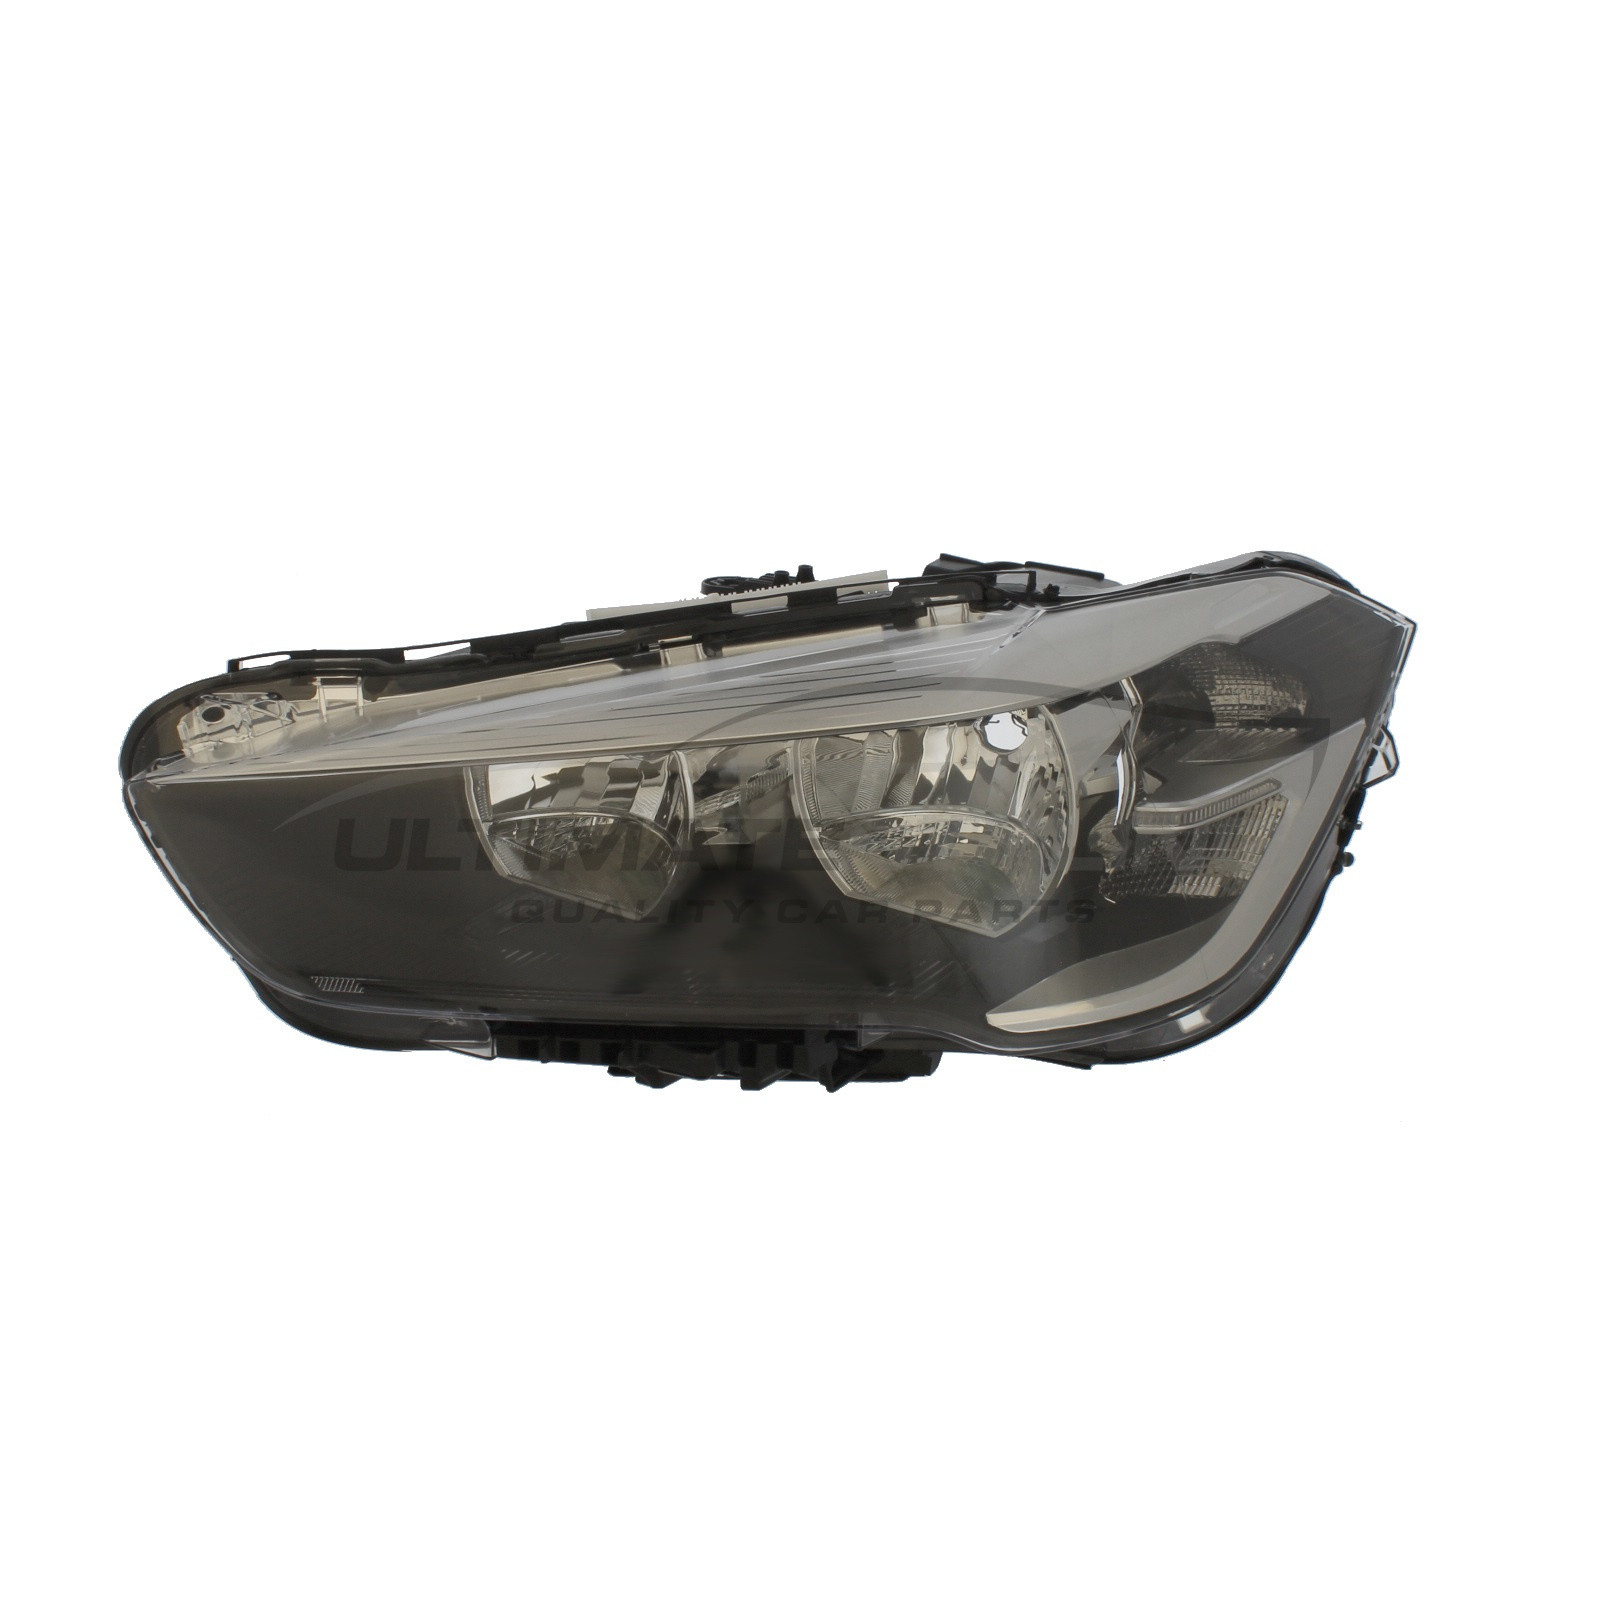 BMW X1 2015-2020 Halogen With LED Daytime Running Lamp, Electric With Motor, Black Headlight / Headlamp Passengers Side (LH)